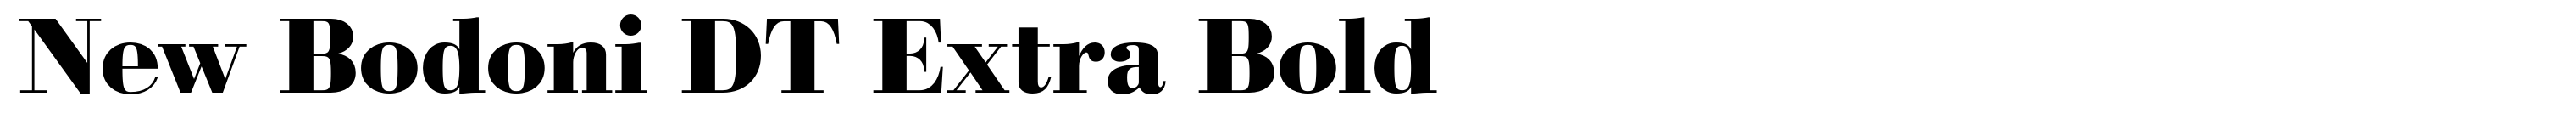 New Bodoni DT Extra Bold